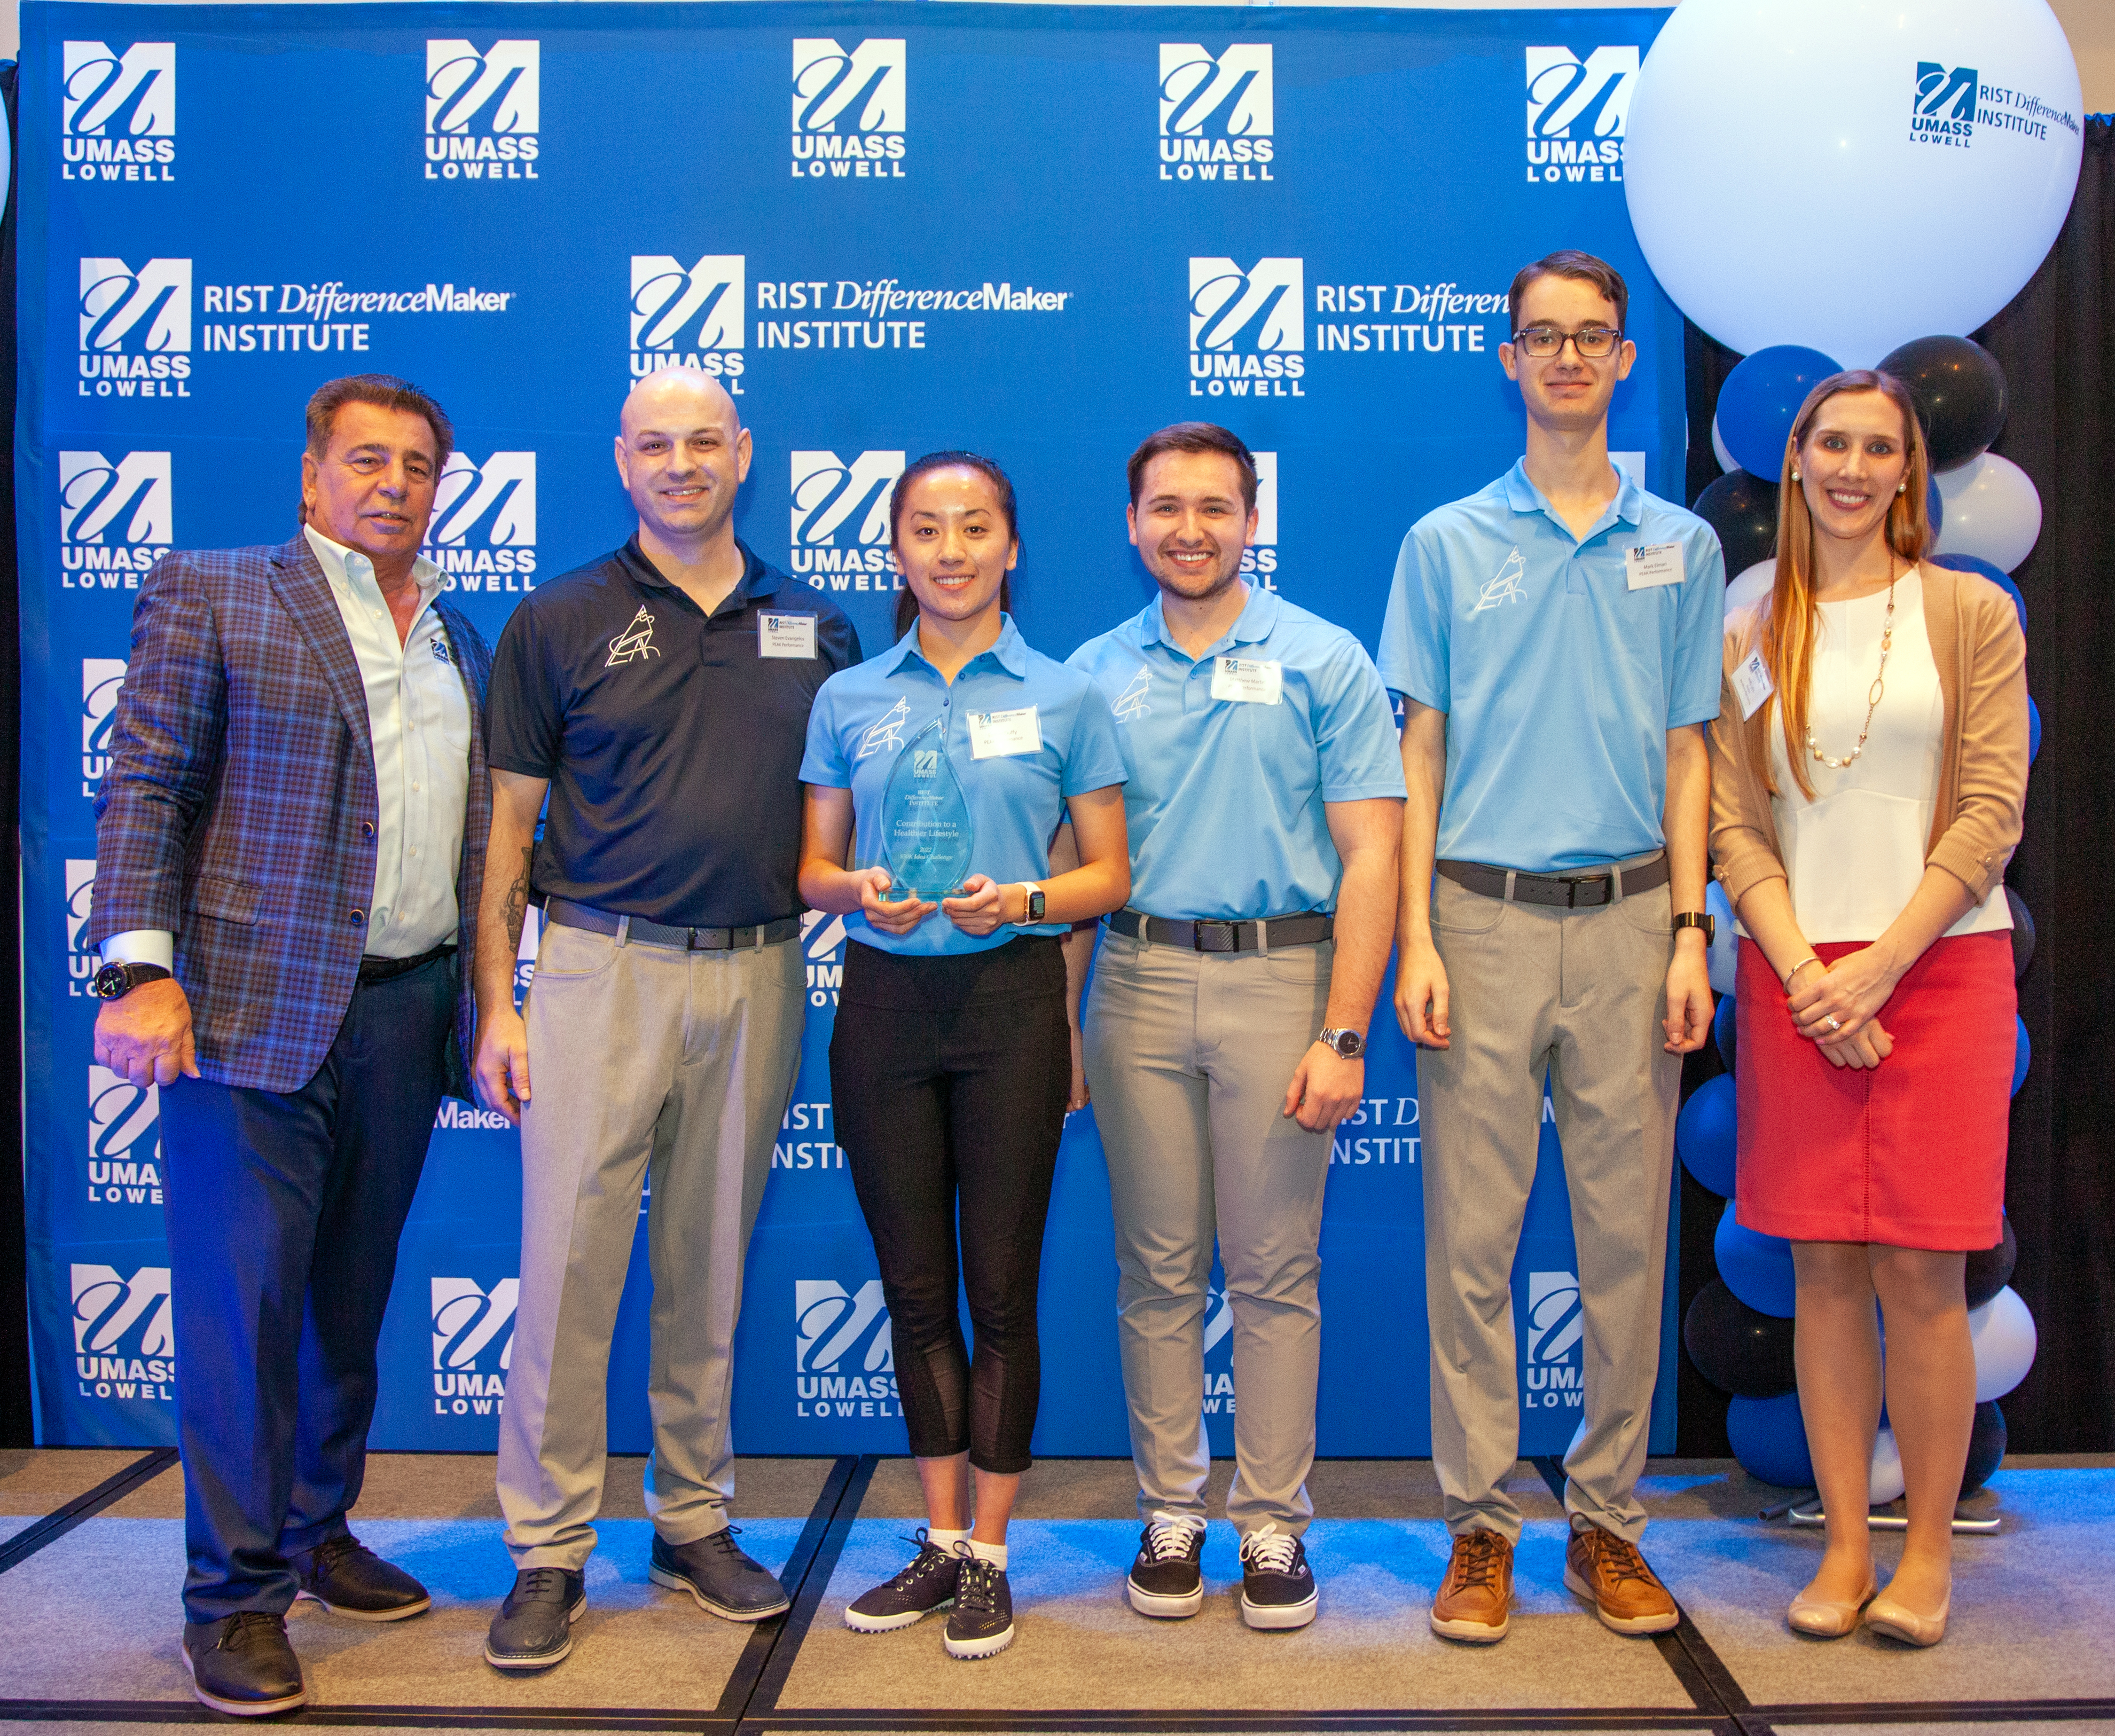 3 male students and 1 female from the PEAK Performance team holding an award pose with Brian Rist and Holly Lalos of Difference Makers against a blue UMass Lowell backdrop.